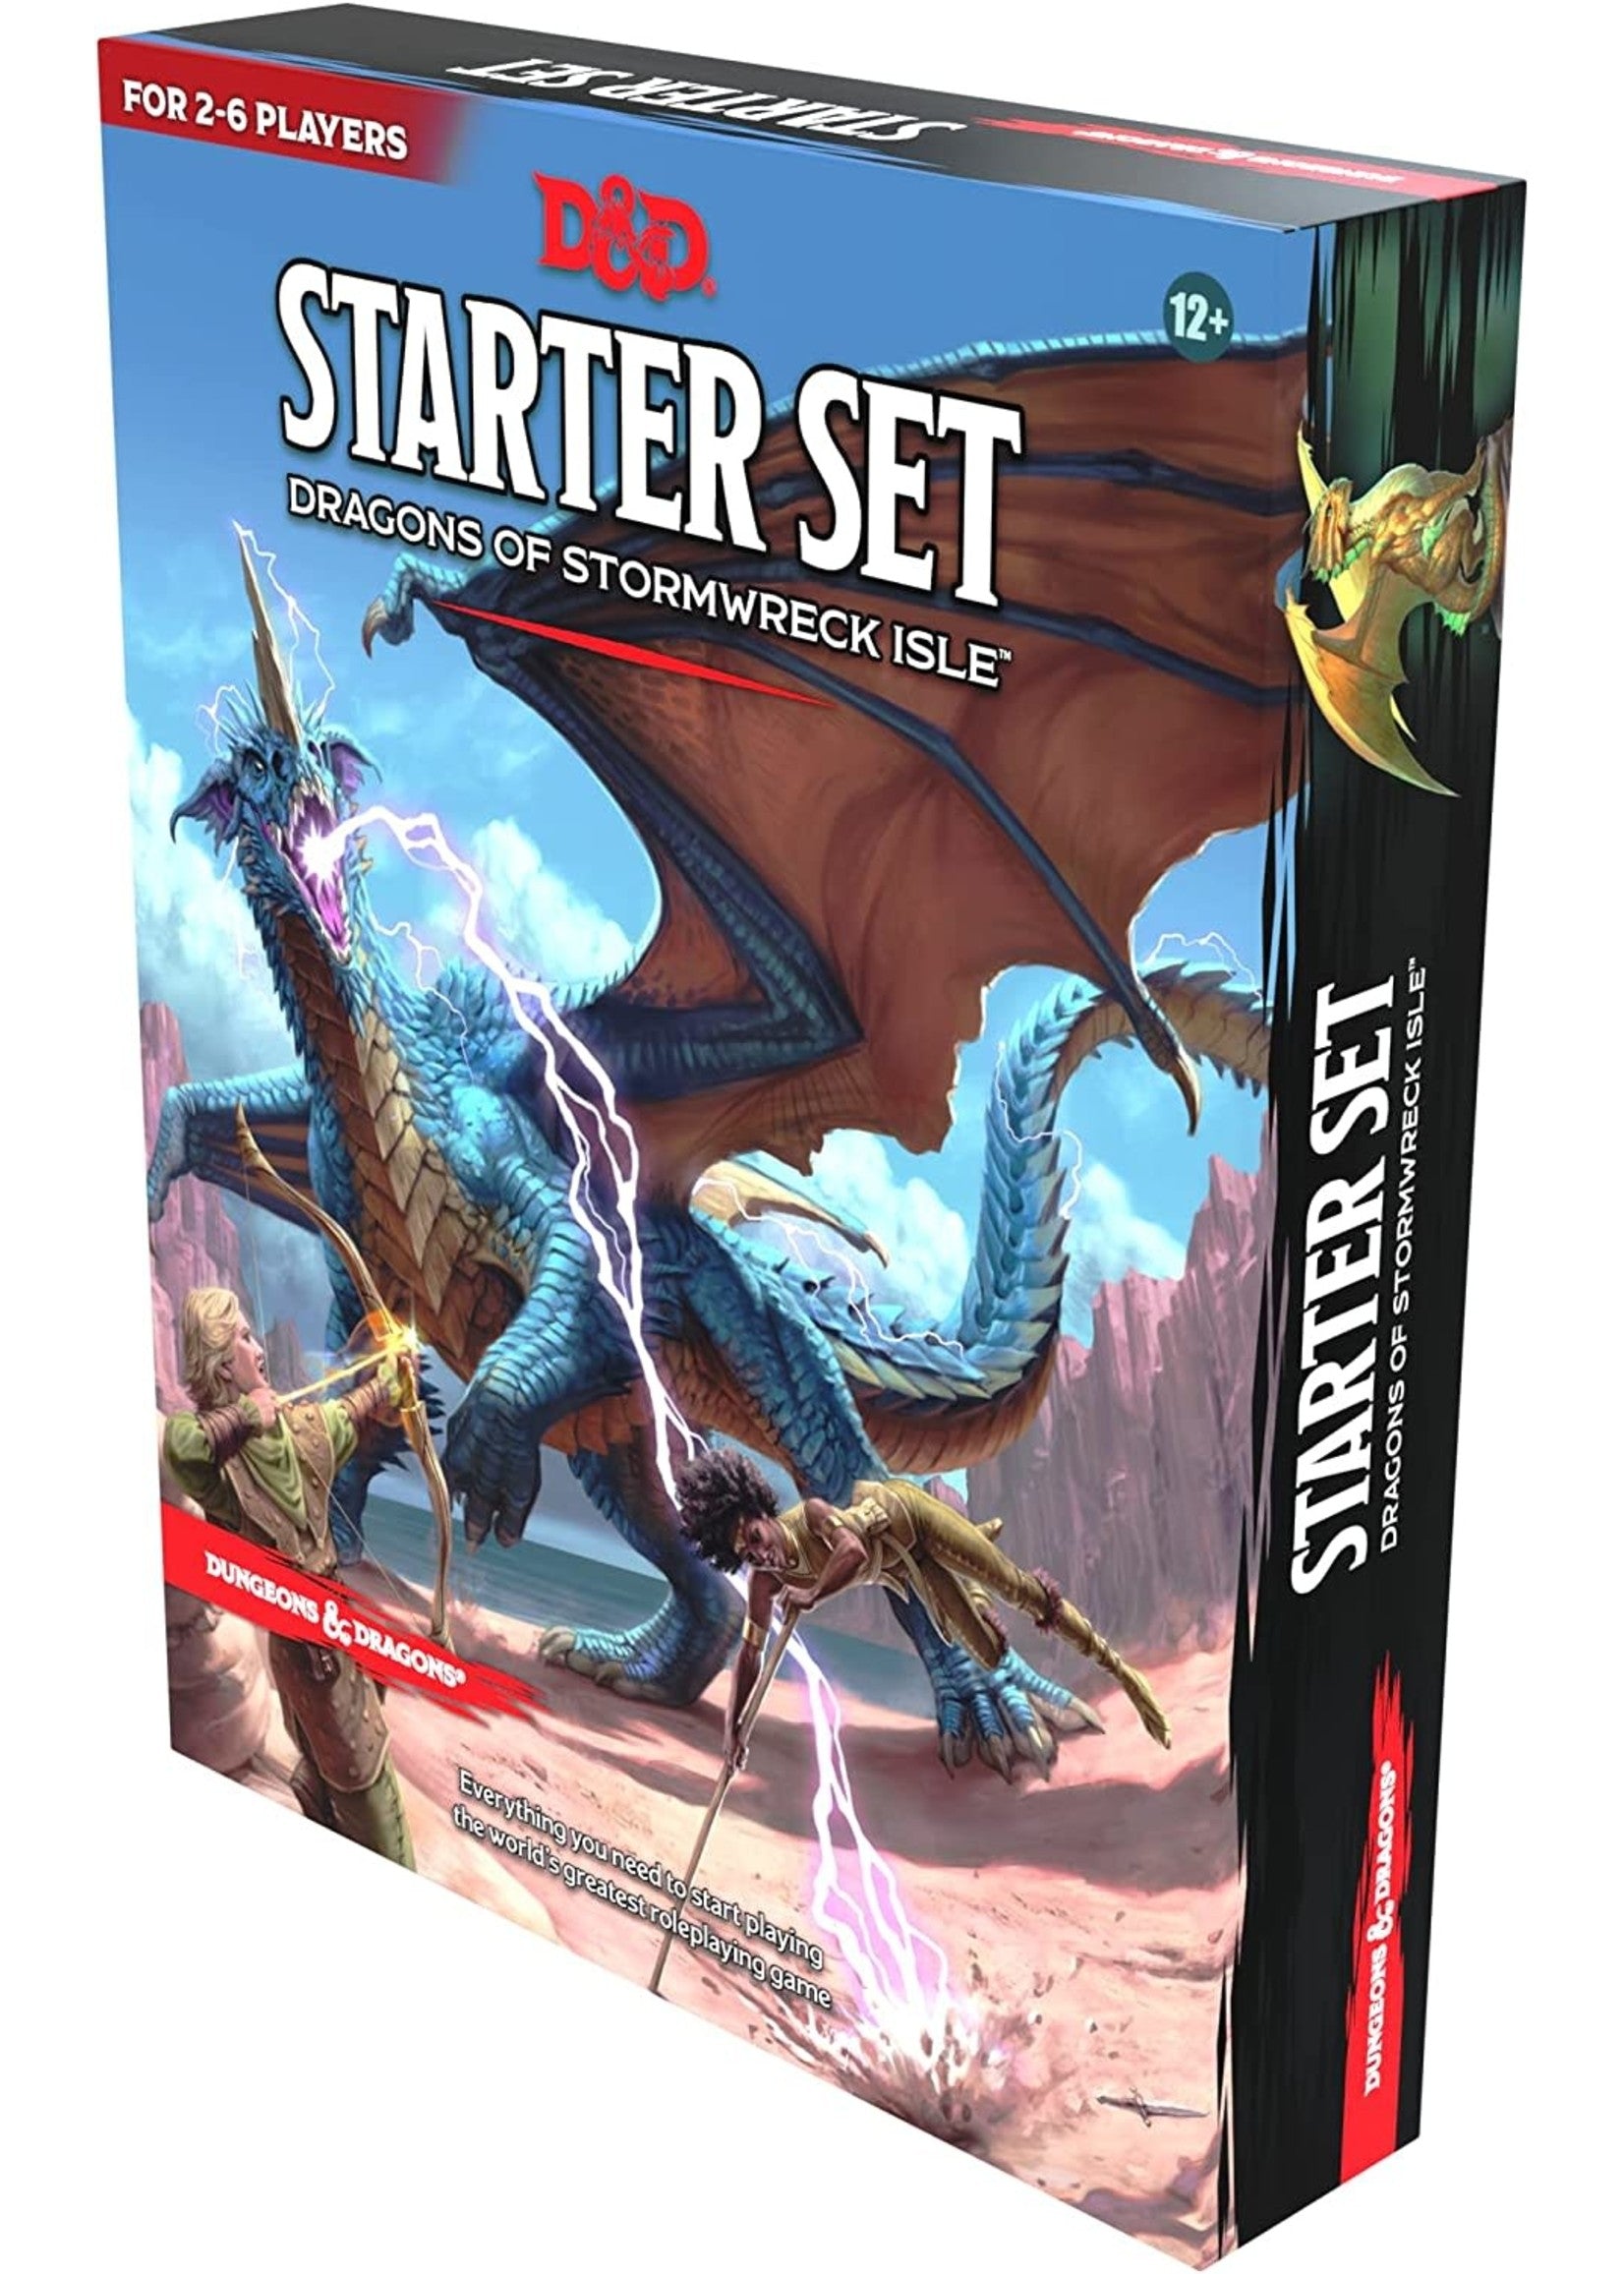 D&D RPG Starter Set: Dragons of Stormwreck Isle english - Loaded Dice Barry Vale of Glamorgan CF64 3HD